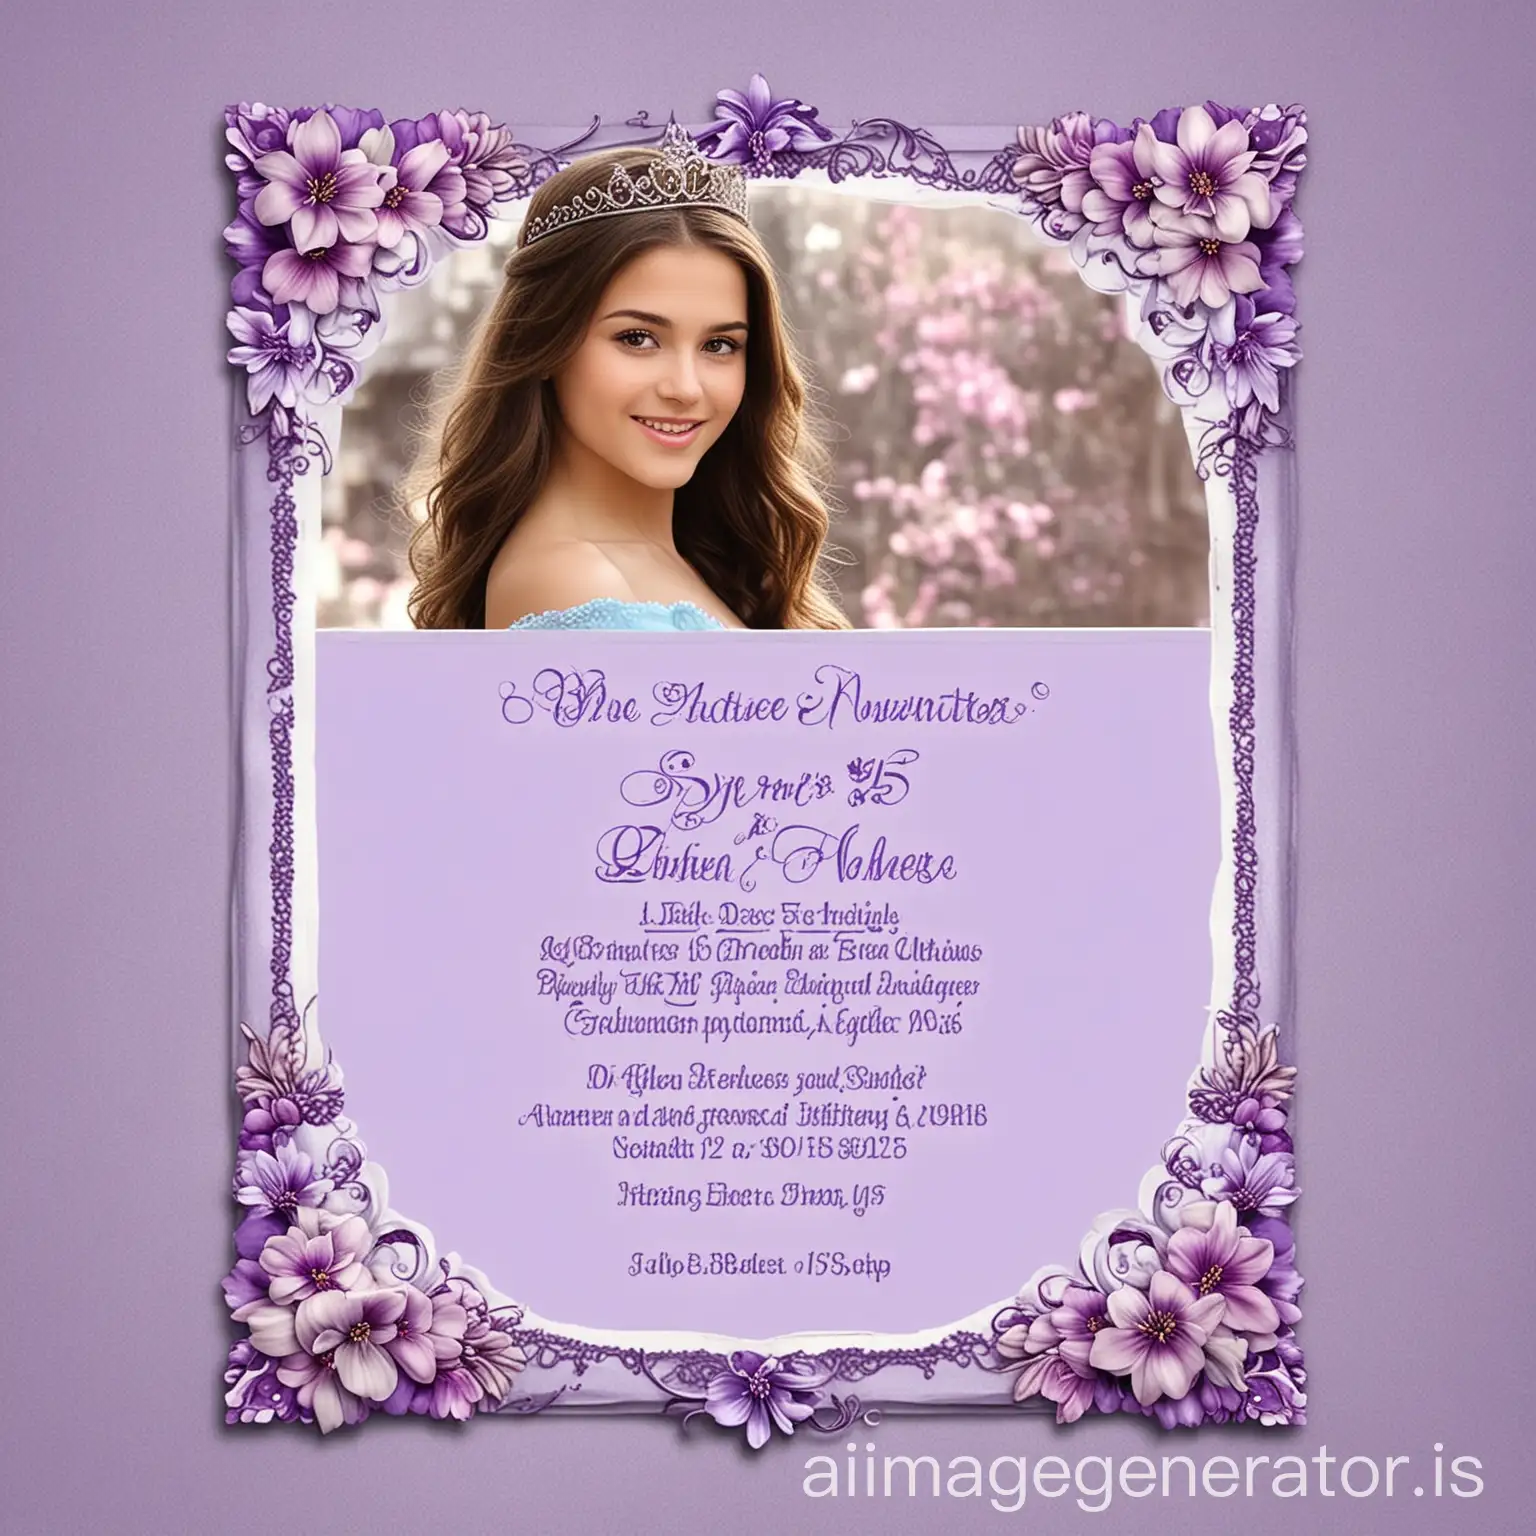 Generate a sweet 15 invitation. Add a realistic  brunette princess. Colors must be sky blue and purple. Add flowers in the borders and let a space to add text.